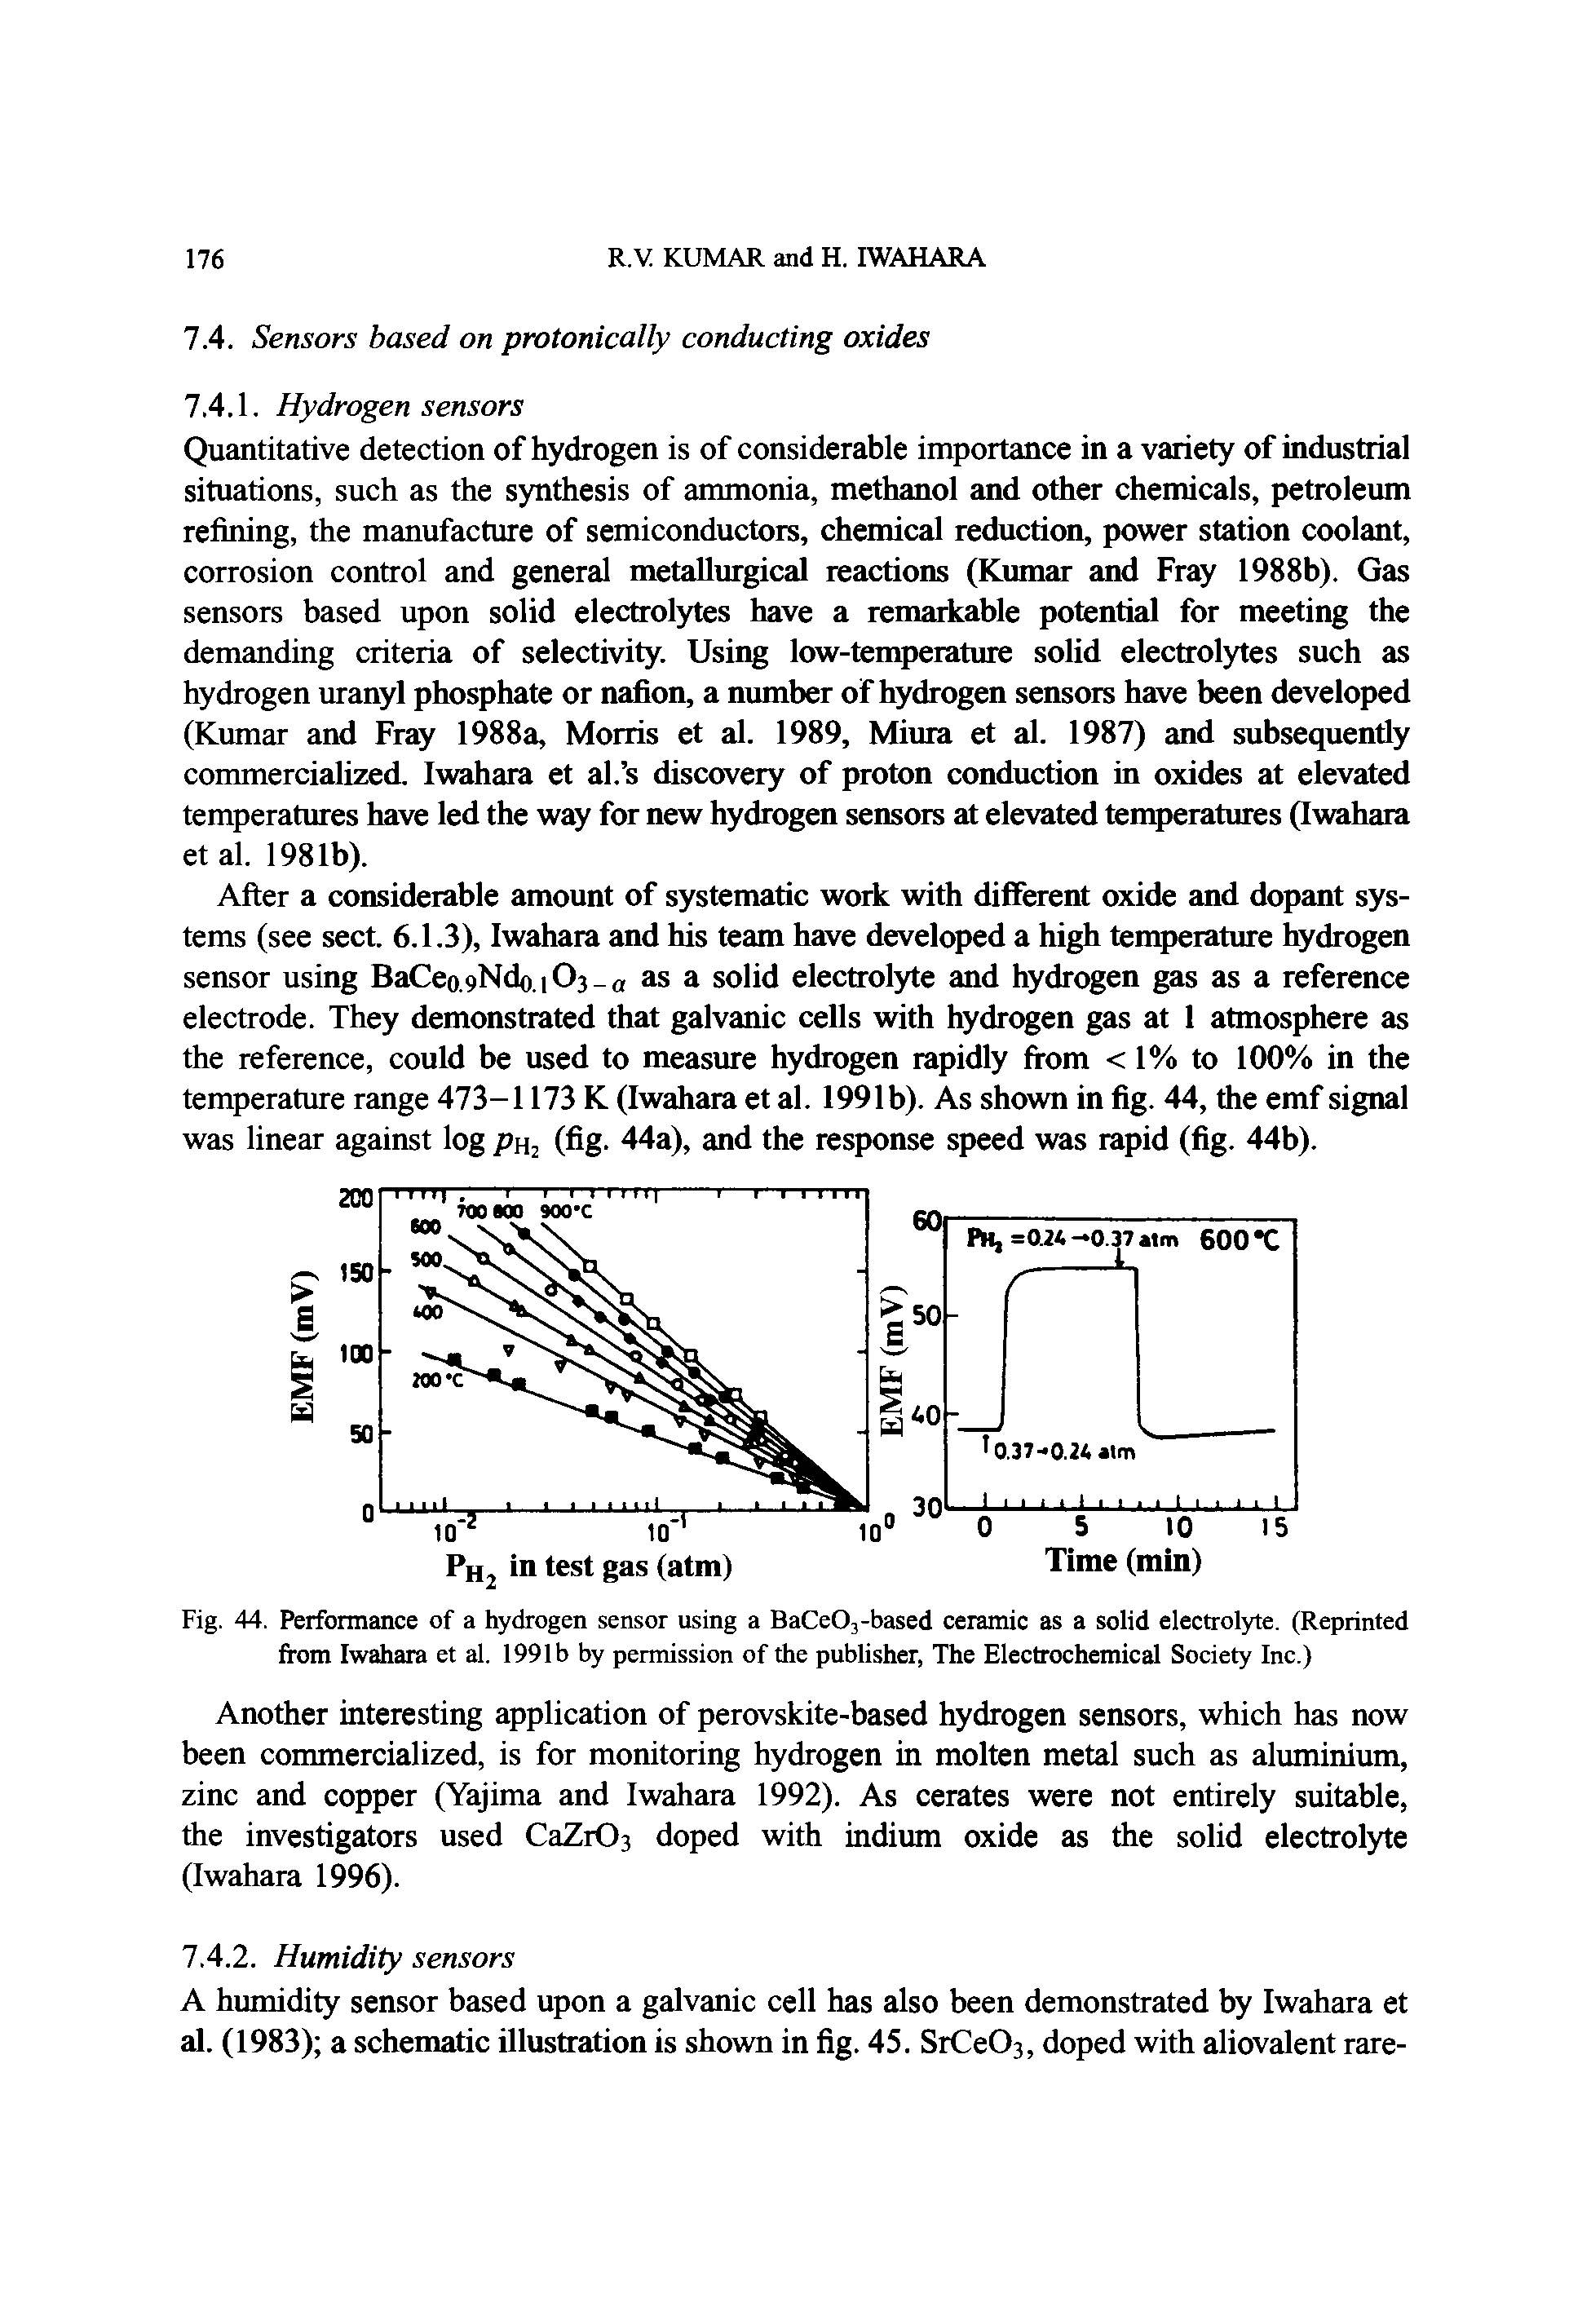 Fig. 44. Performance of a hydrogen sensor using a BaCeOs-based ceramic as a solid electrolyte. (Reprinted from Iwahara et al. 1991b by permission of the publisher, The Electrochemical Society Inc.)...